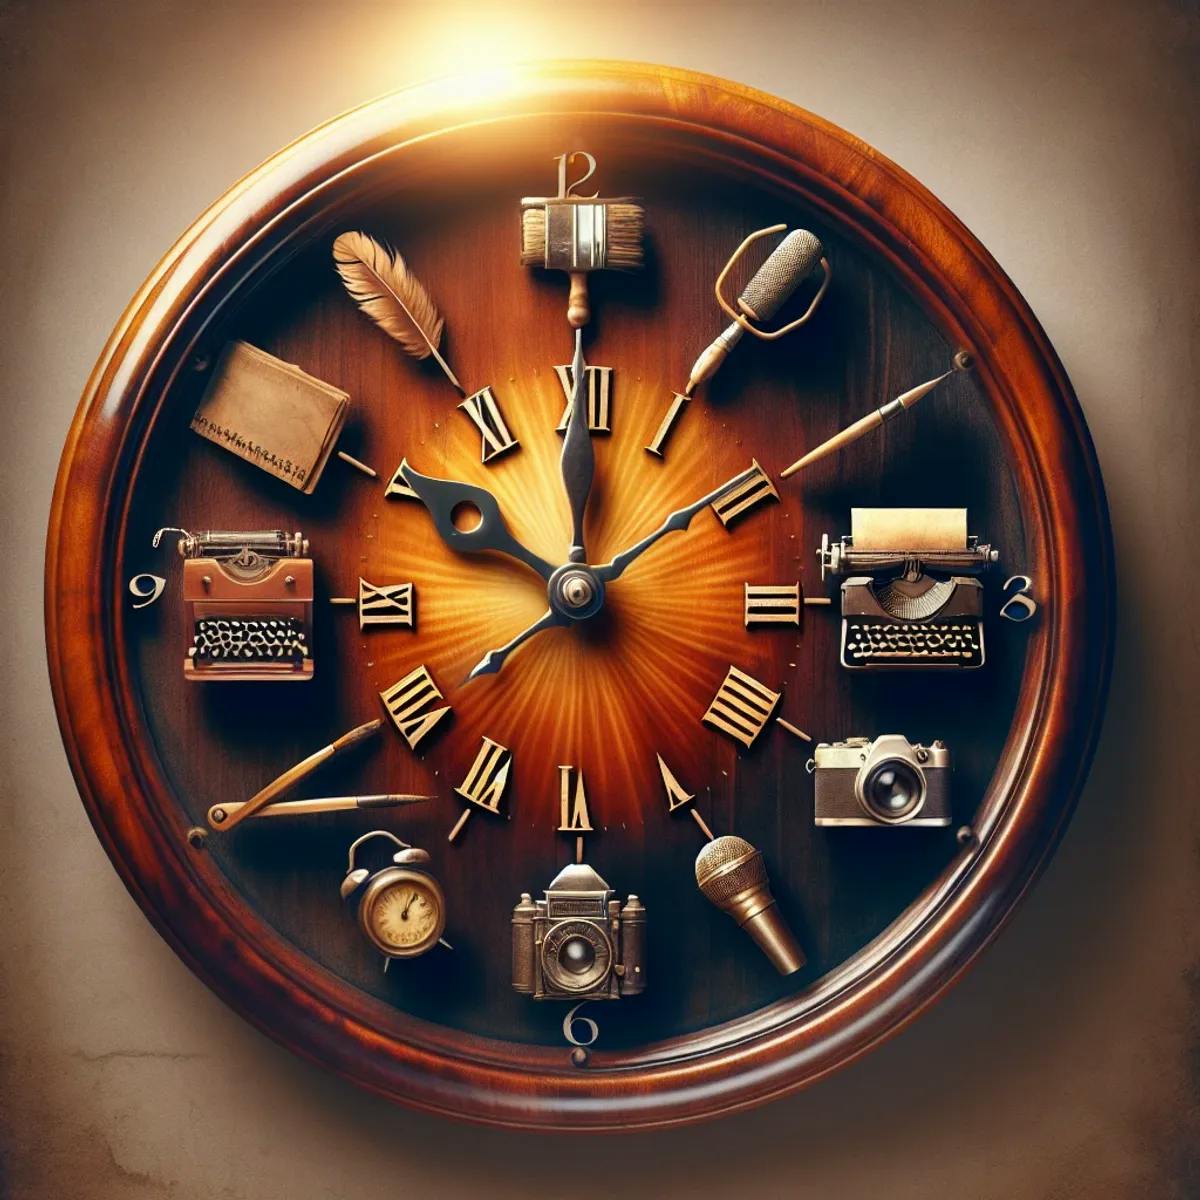 An antique analog clock with content creation symbols for the hours, symbolizing the ability to write more content in less time.